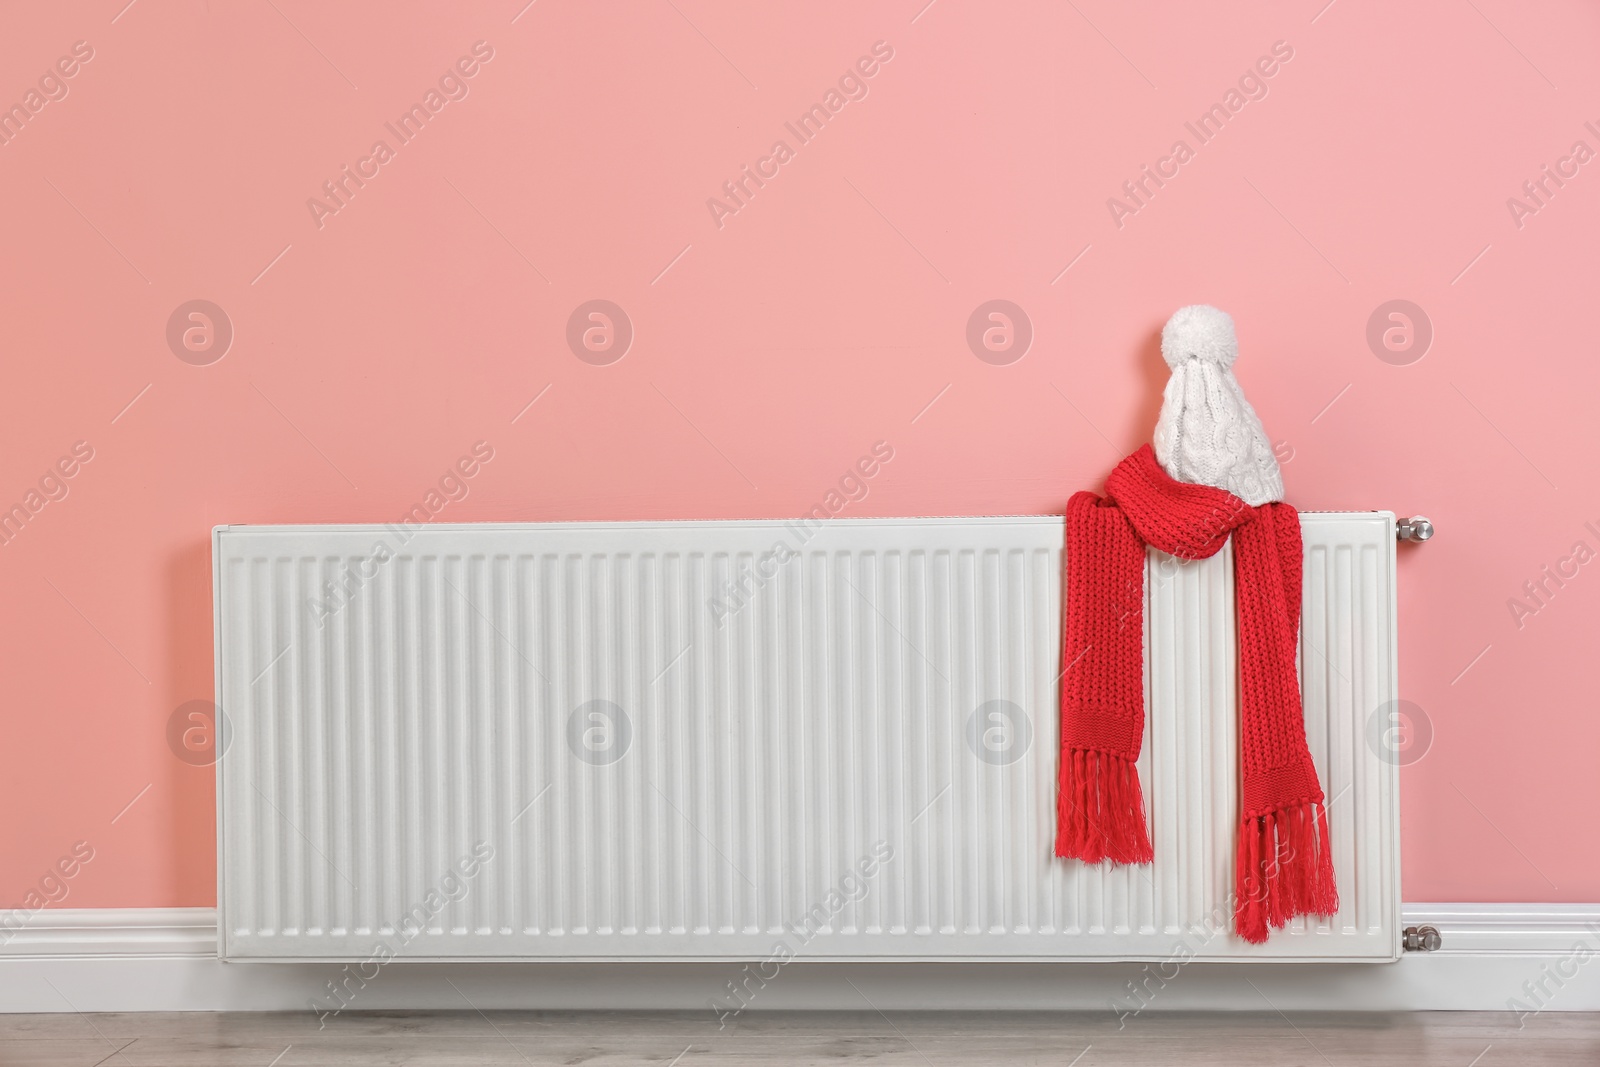 Photo of Heating radiator with knitted cap and scarf near color wall. Space for text